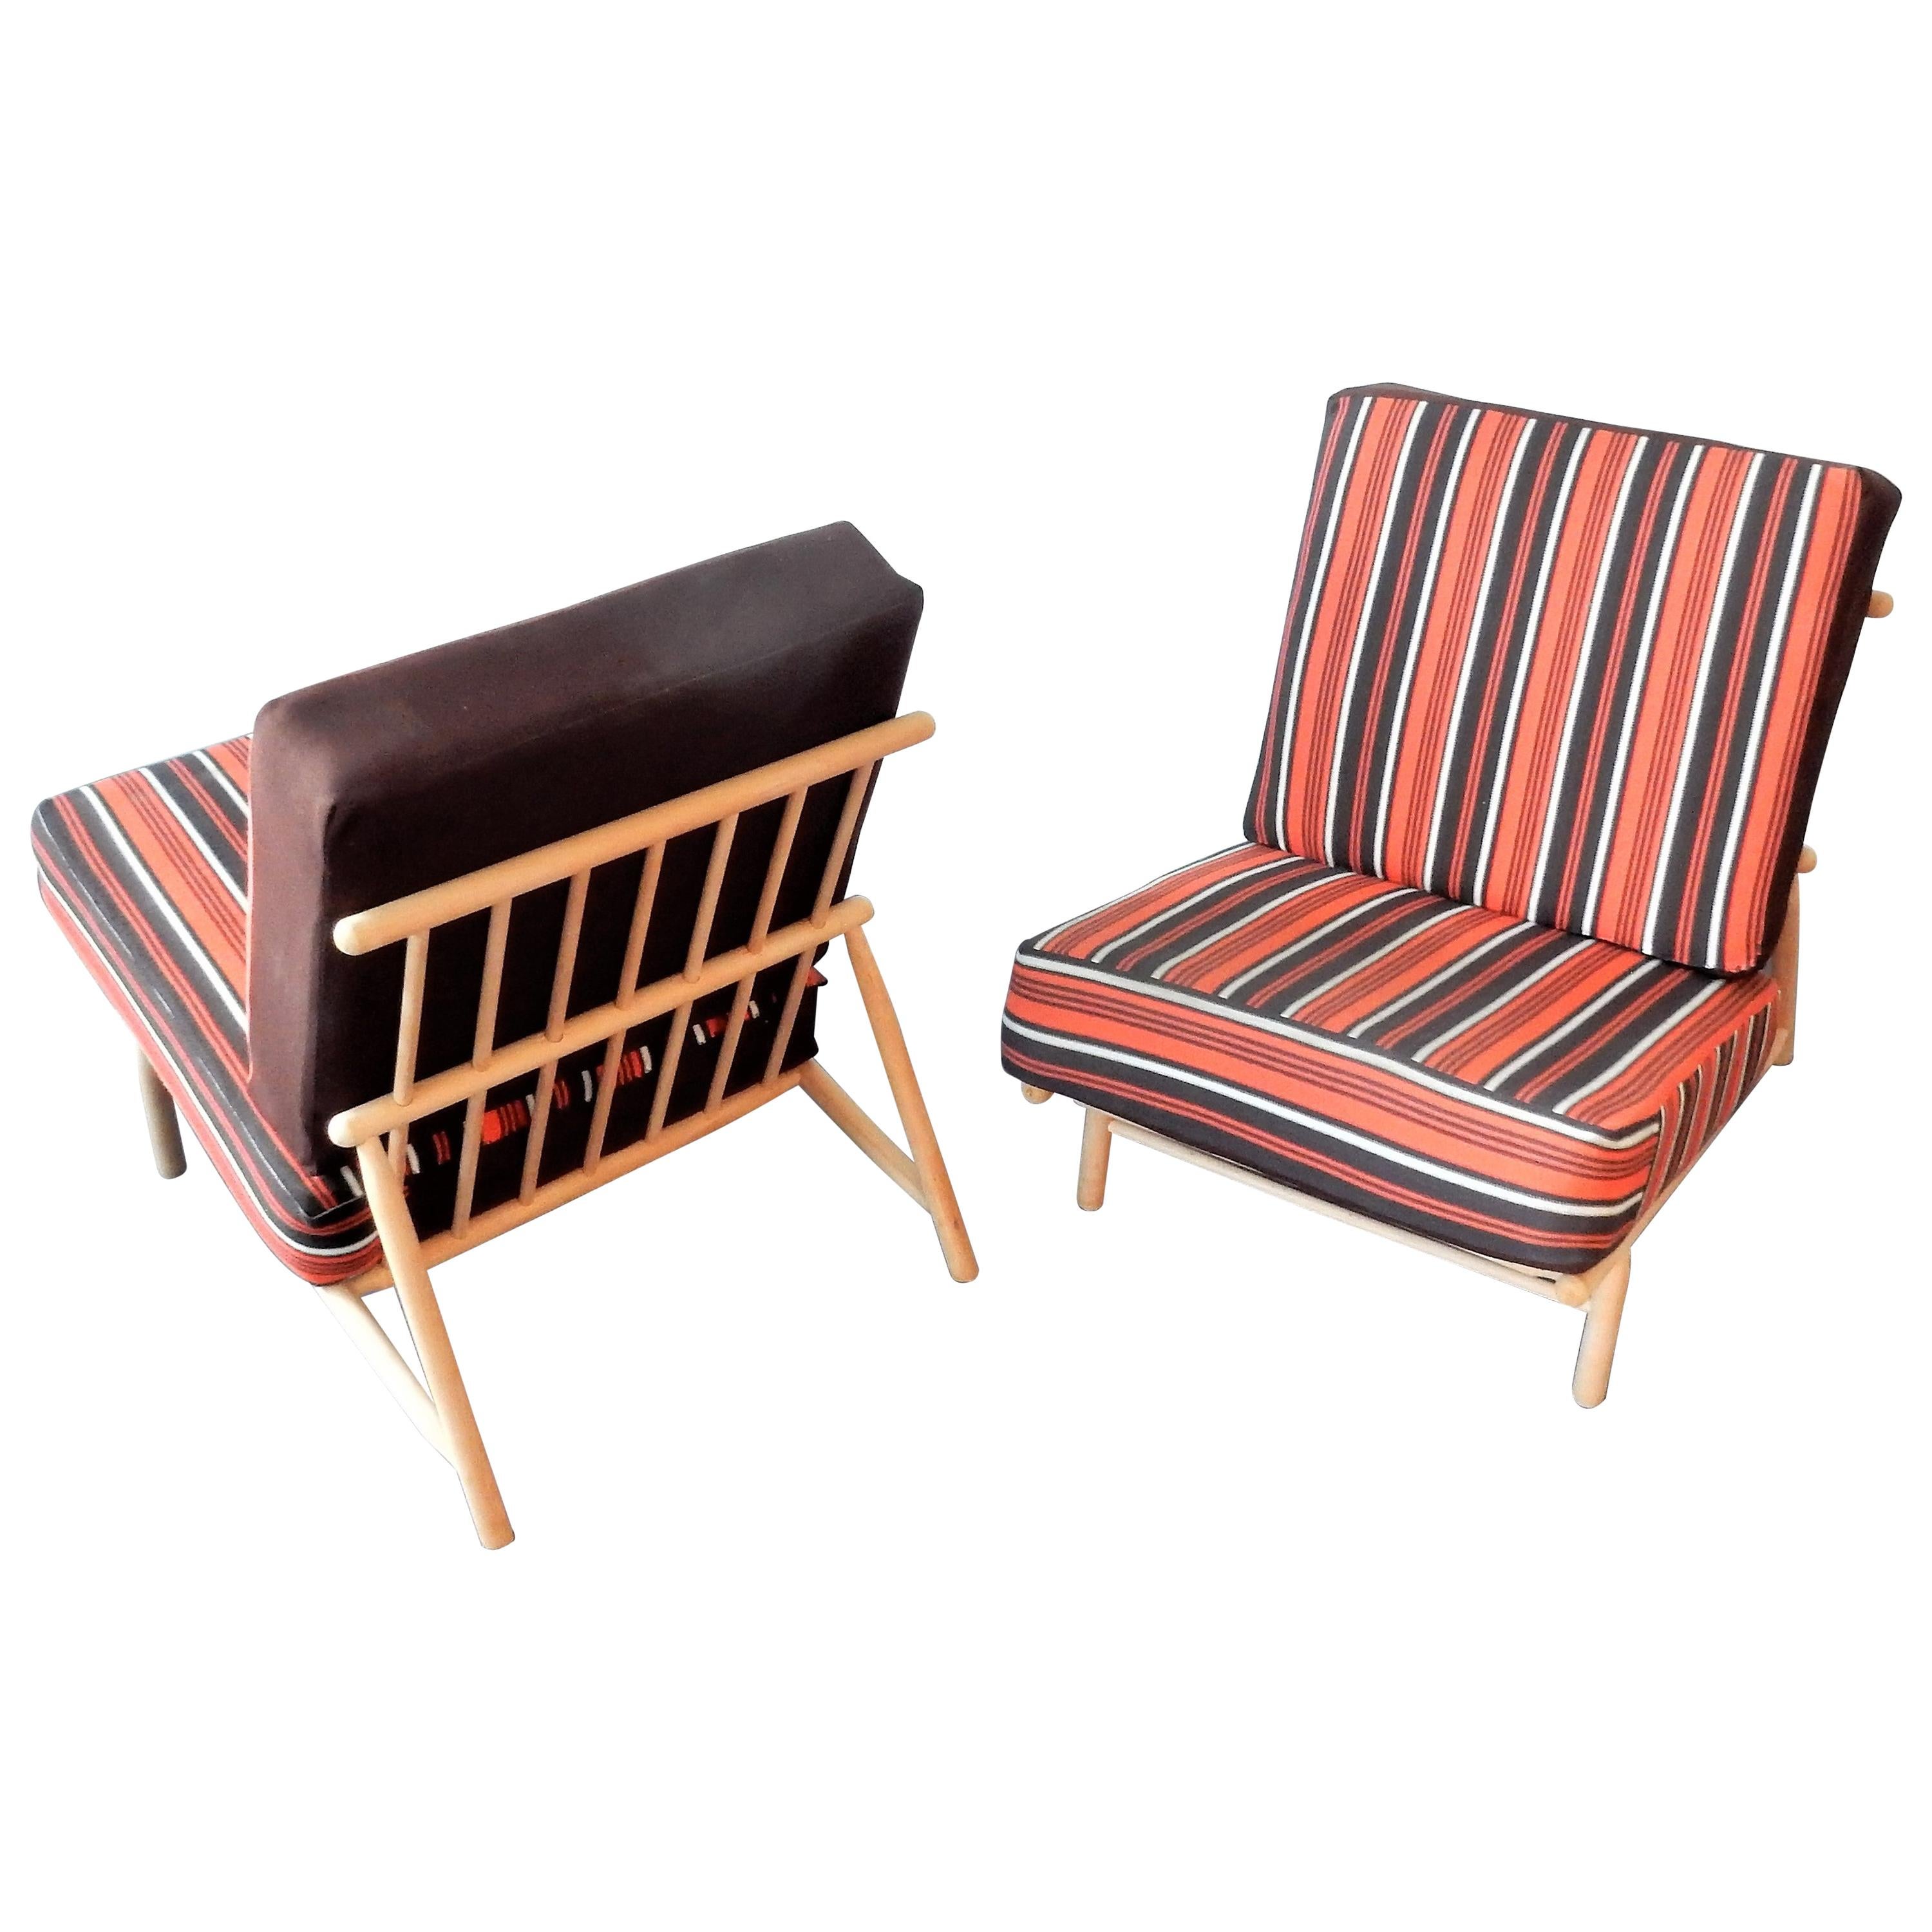 Set of 2 Lounge Chairs by Alf Svensson for DUX, Sweden, 1950s